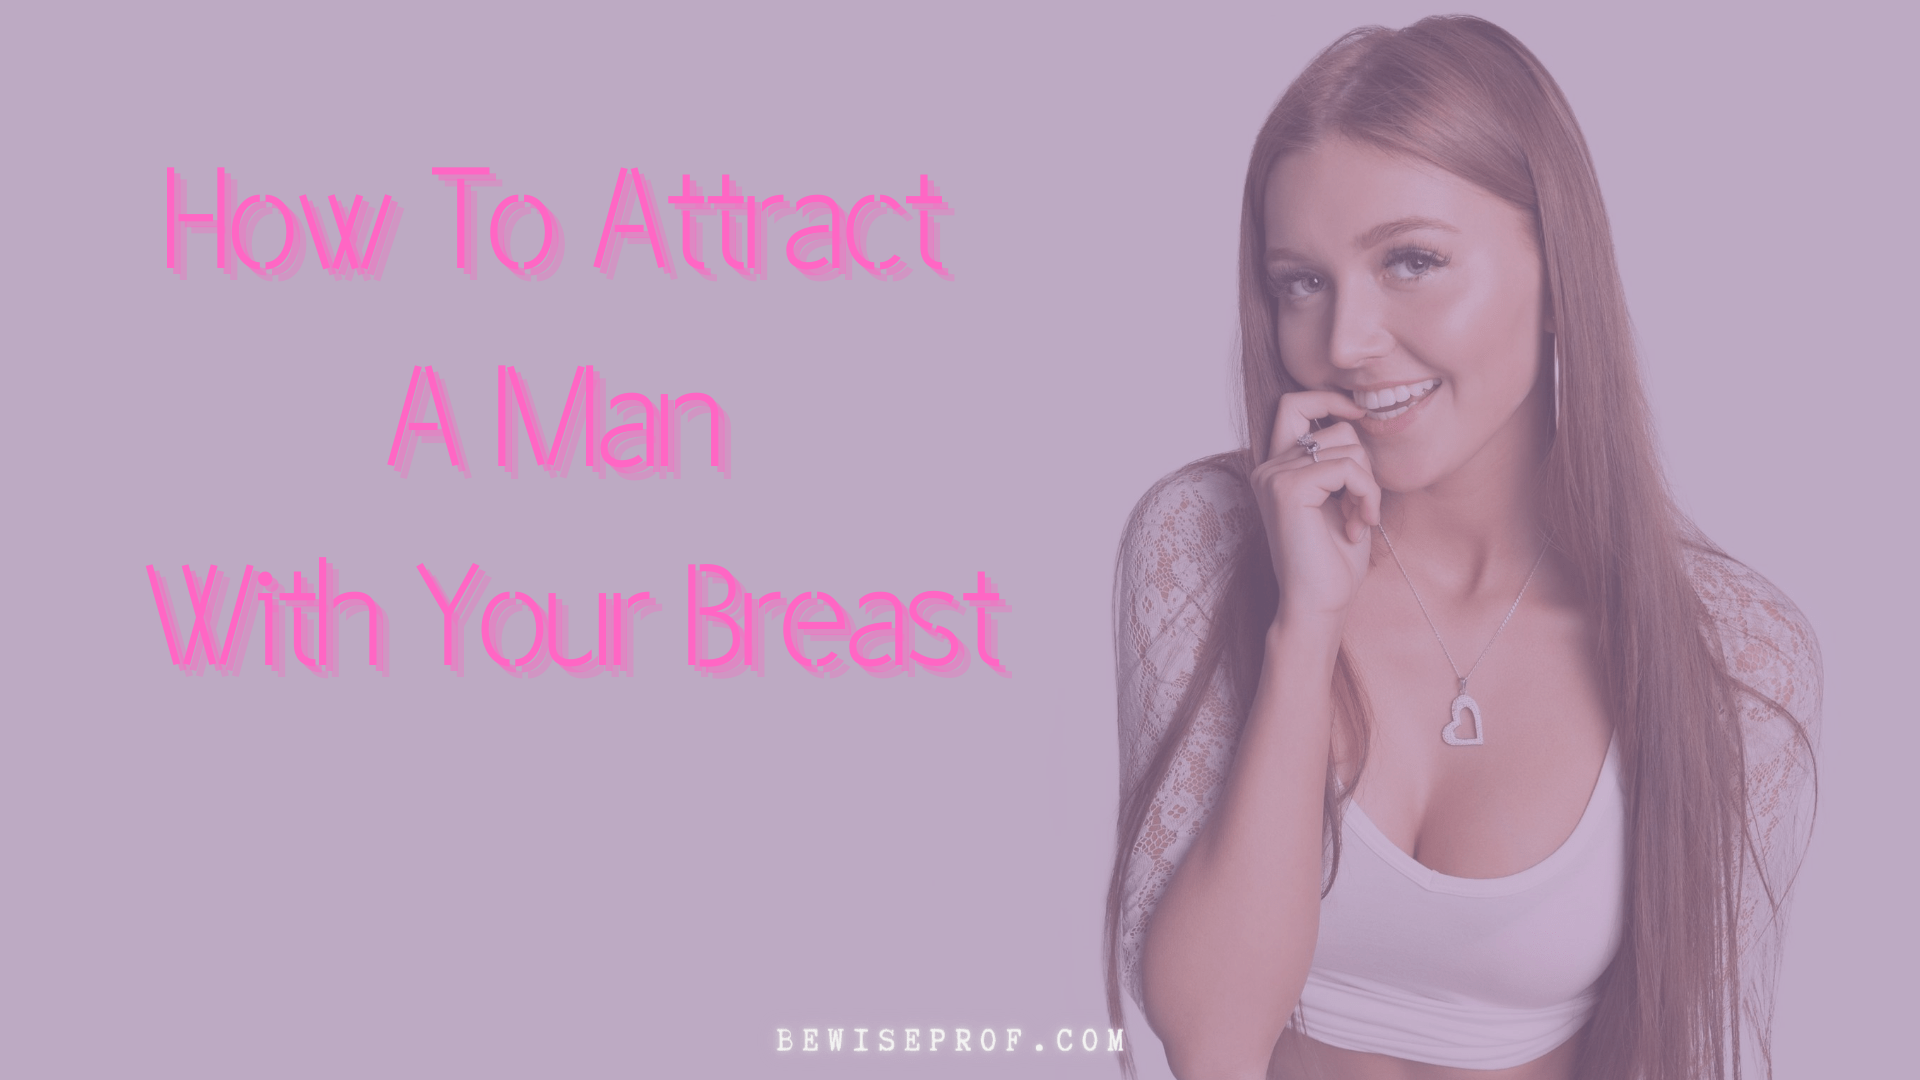 How To Attract A Man With Your Breast